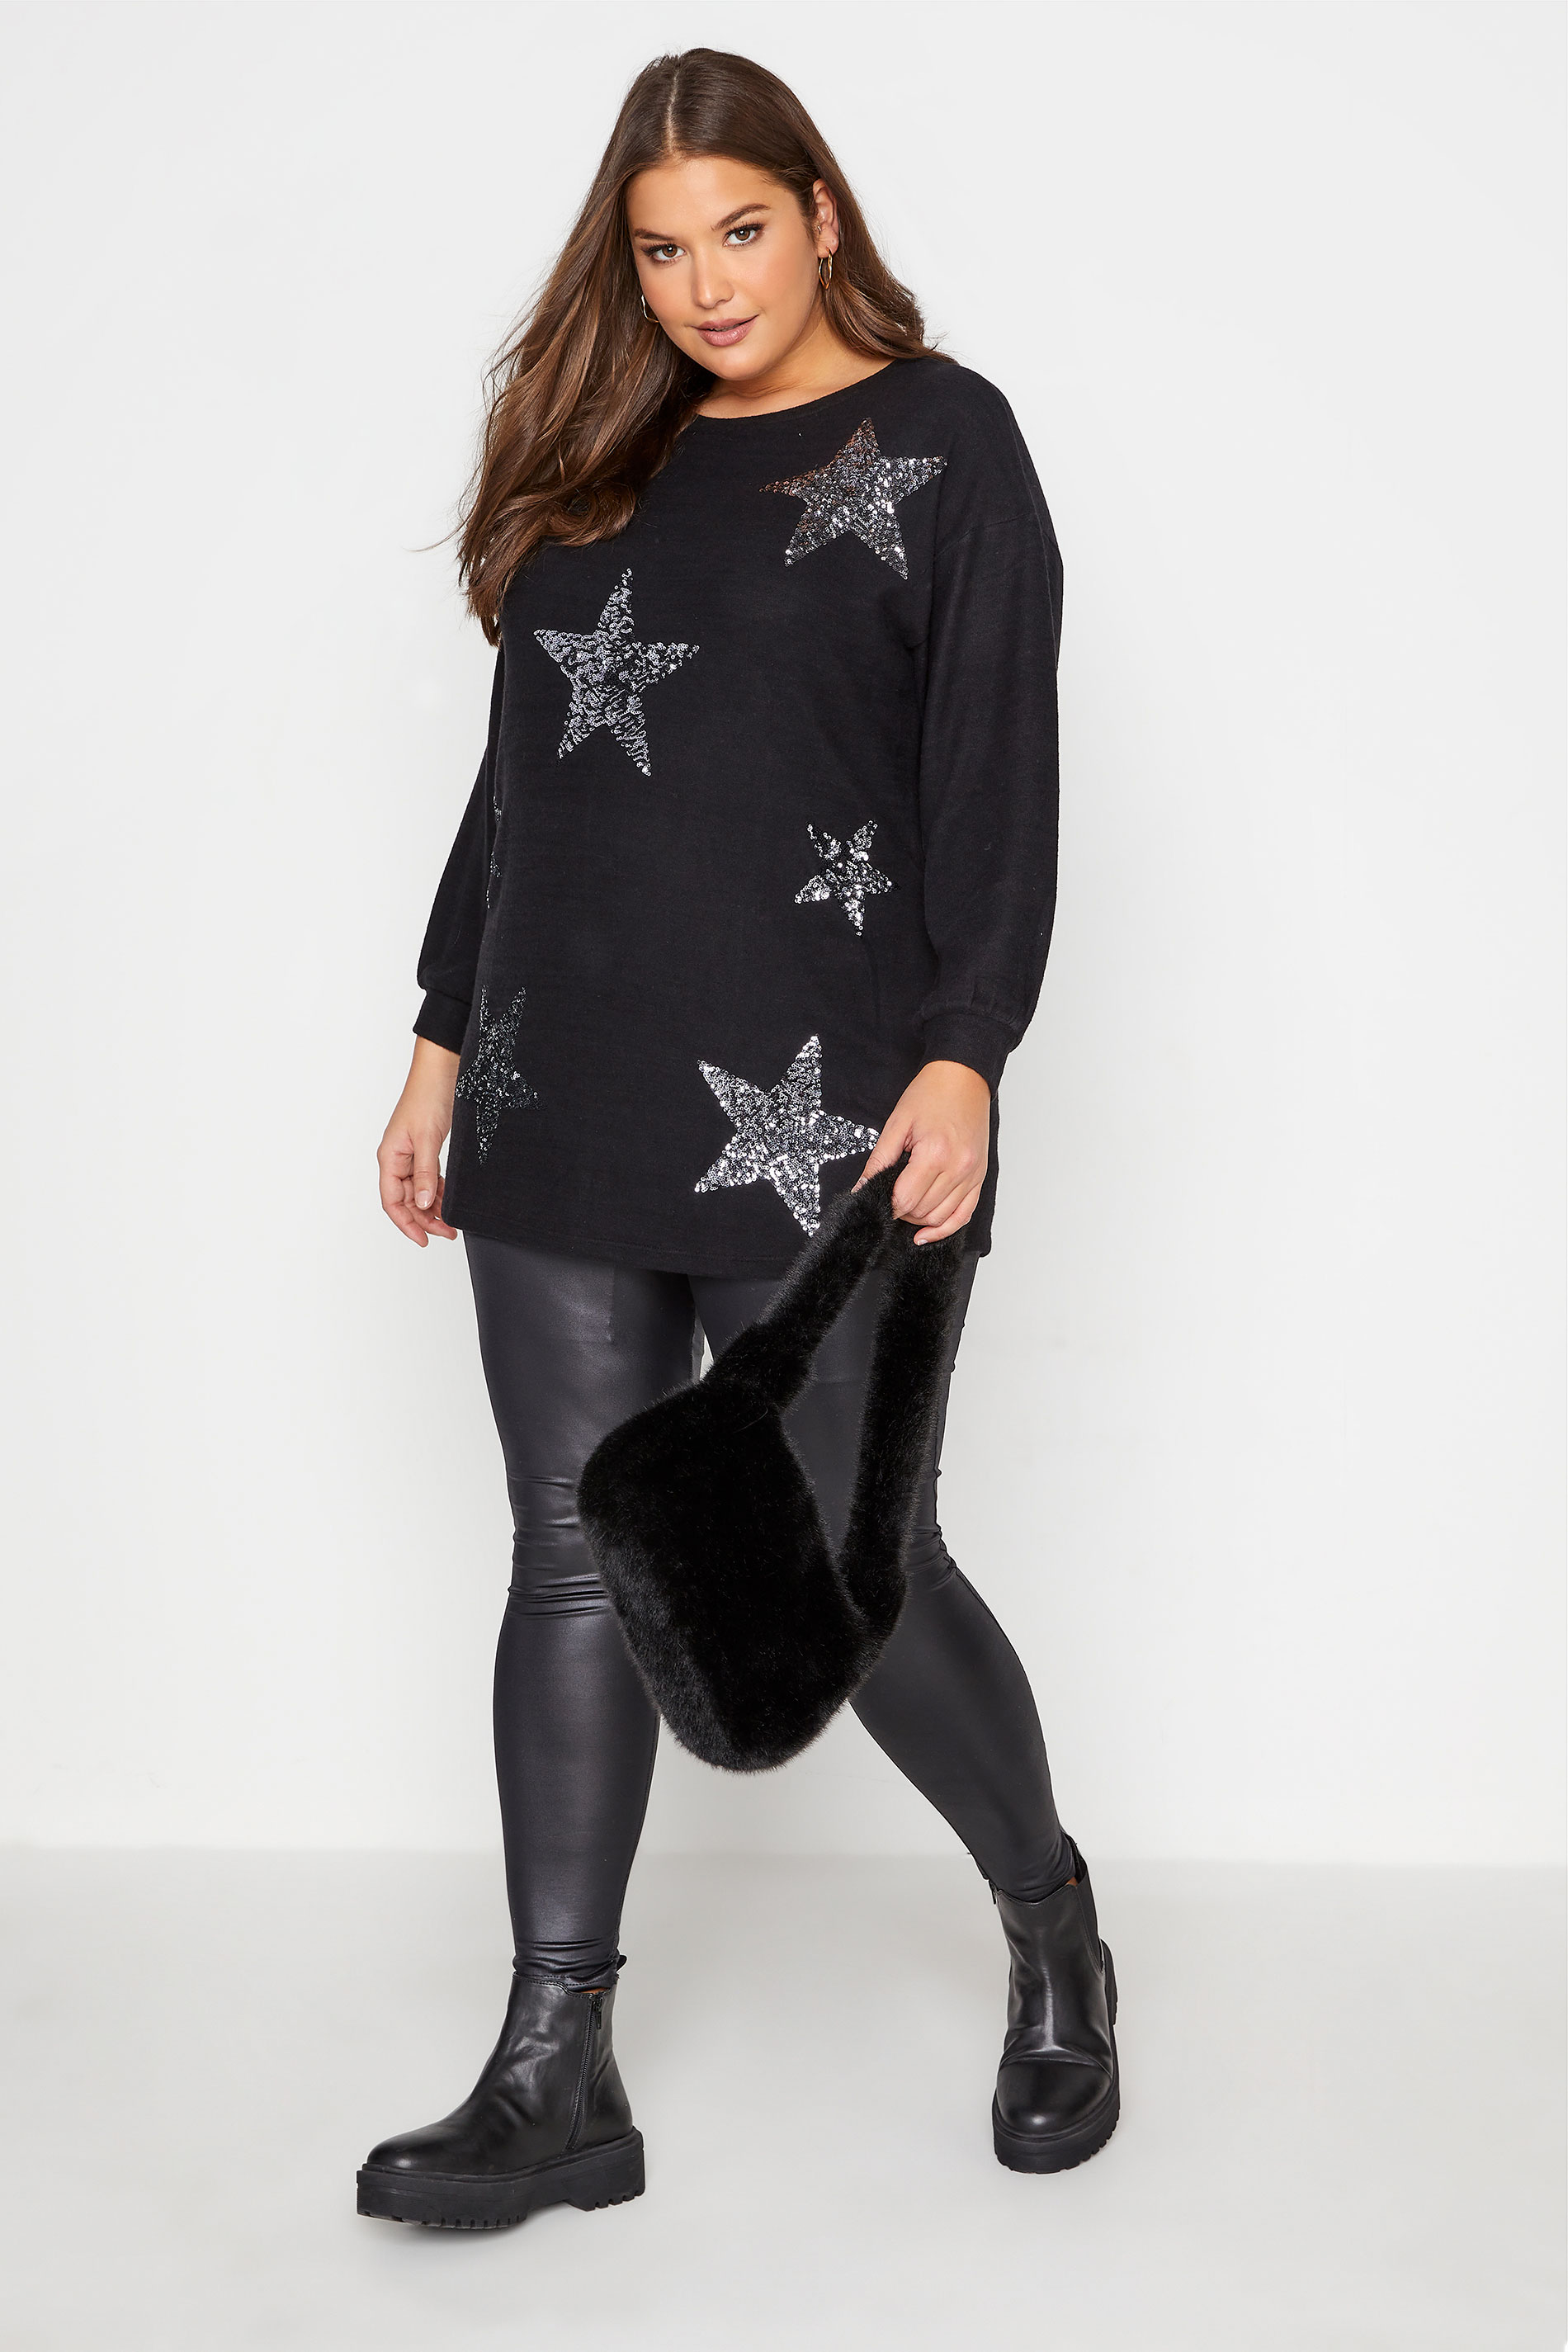 Plus Size Black Sequin Star Soft Touch Jumper | Yours Clothing 2